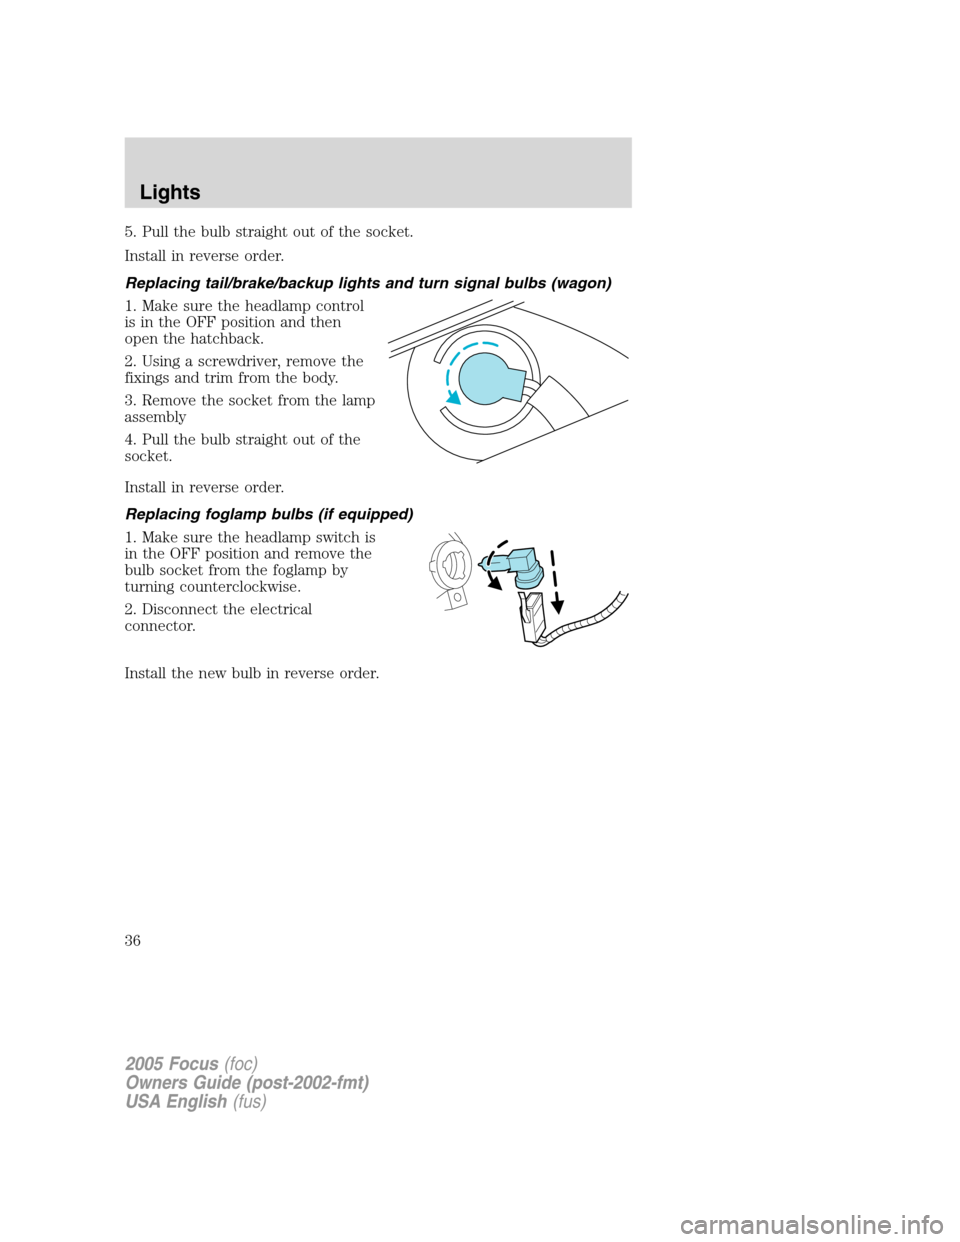 FORD FOCUS 2005 1.G Owners Guide 5. Pull the bulb straight out of the socket.
Install in reverse order.
Replacing tail/brake/backup lights and turn signal bulbs (wagon)
1. Make sure the headlamp control
is in the OFF position and the